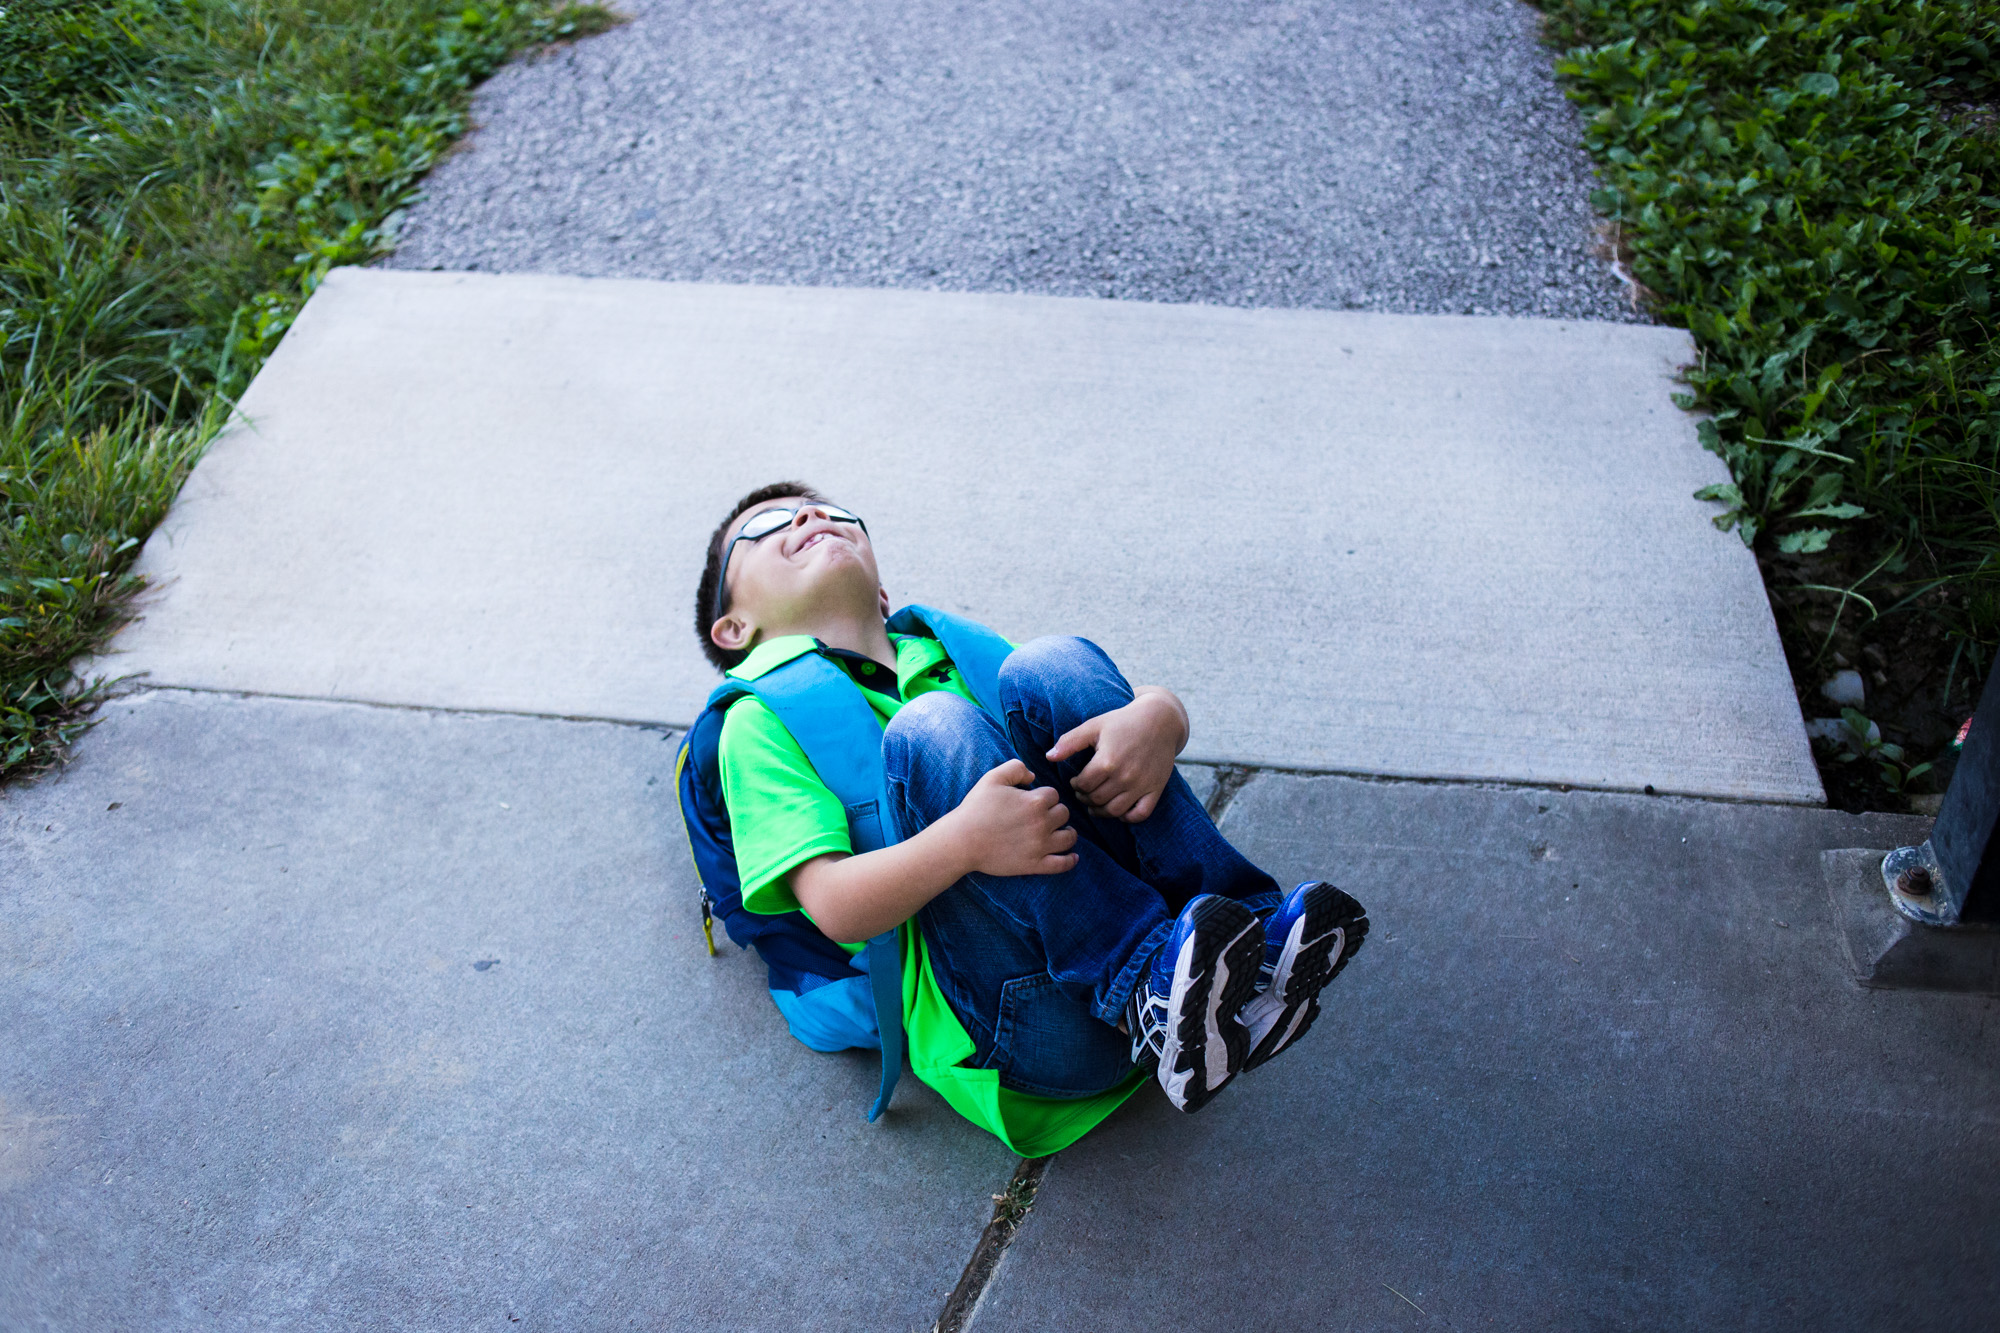  After his mom picked him up from school, Treven curled up on the sidewalk outside before bouncing back up again. Treven also has ADHD and needs medication to help him focus during the day in school. Even though he can be a lot to handle when he’s hy